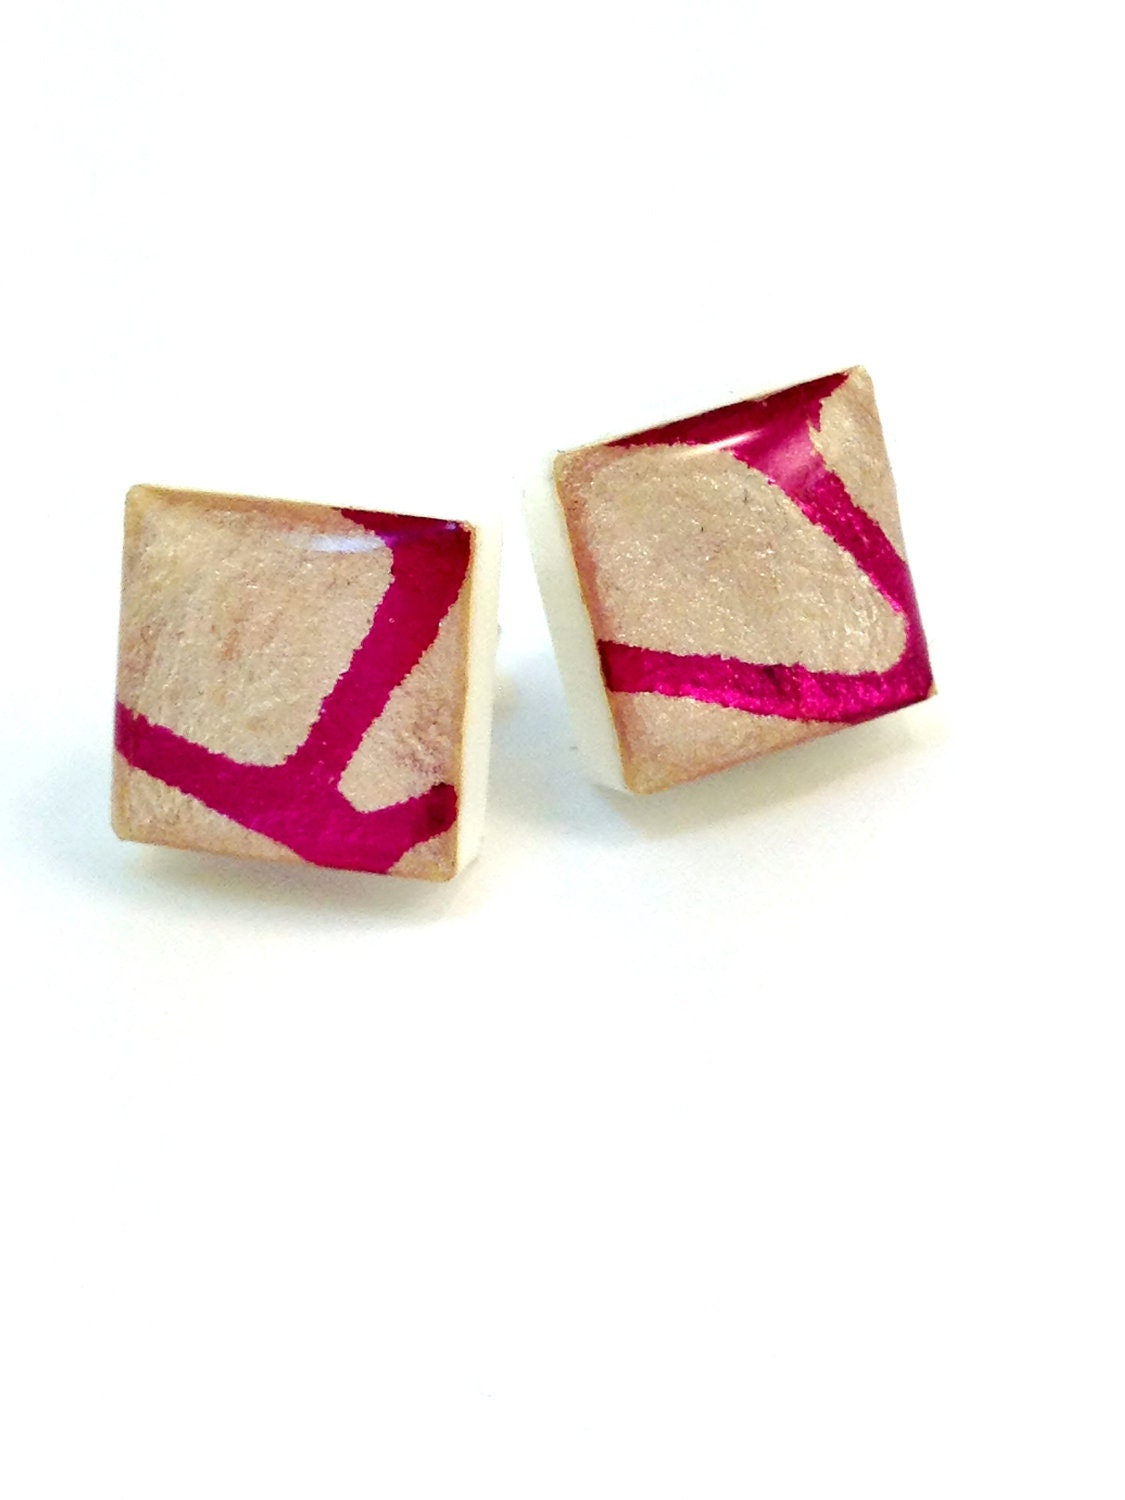 Resin Stud Earrings Square Ivory Pink Foil Embossed Acrylic